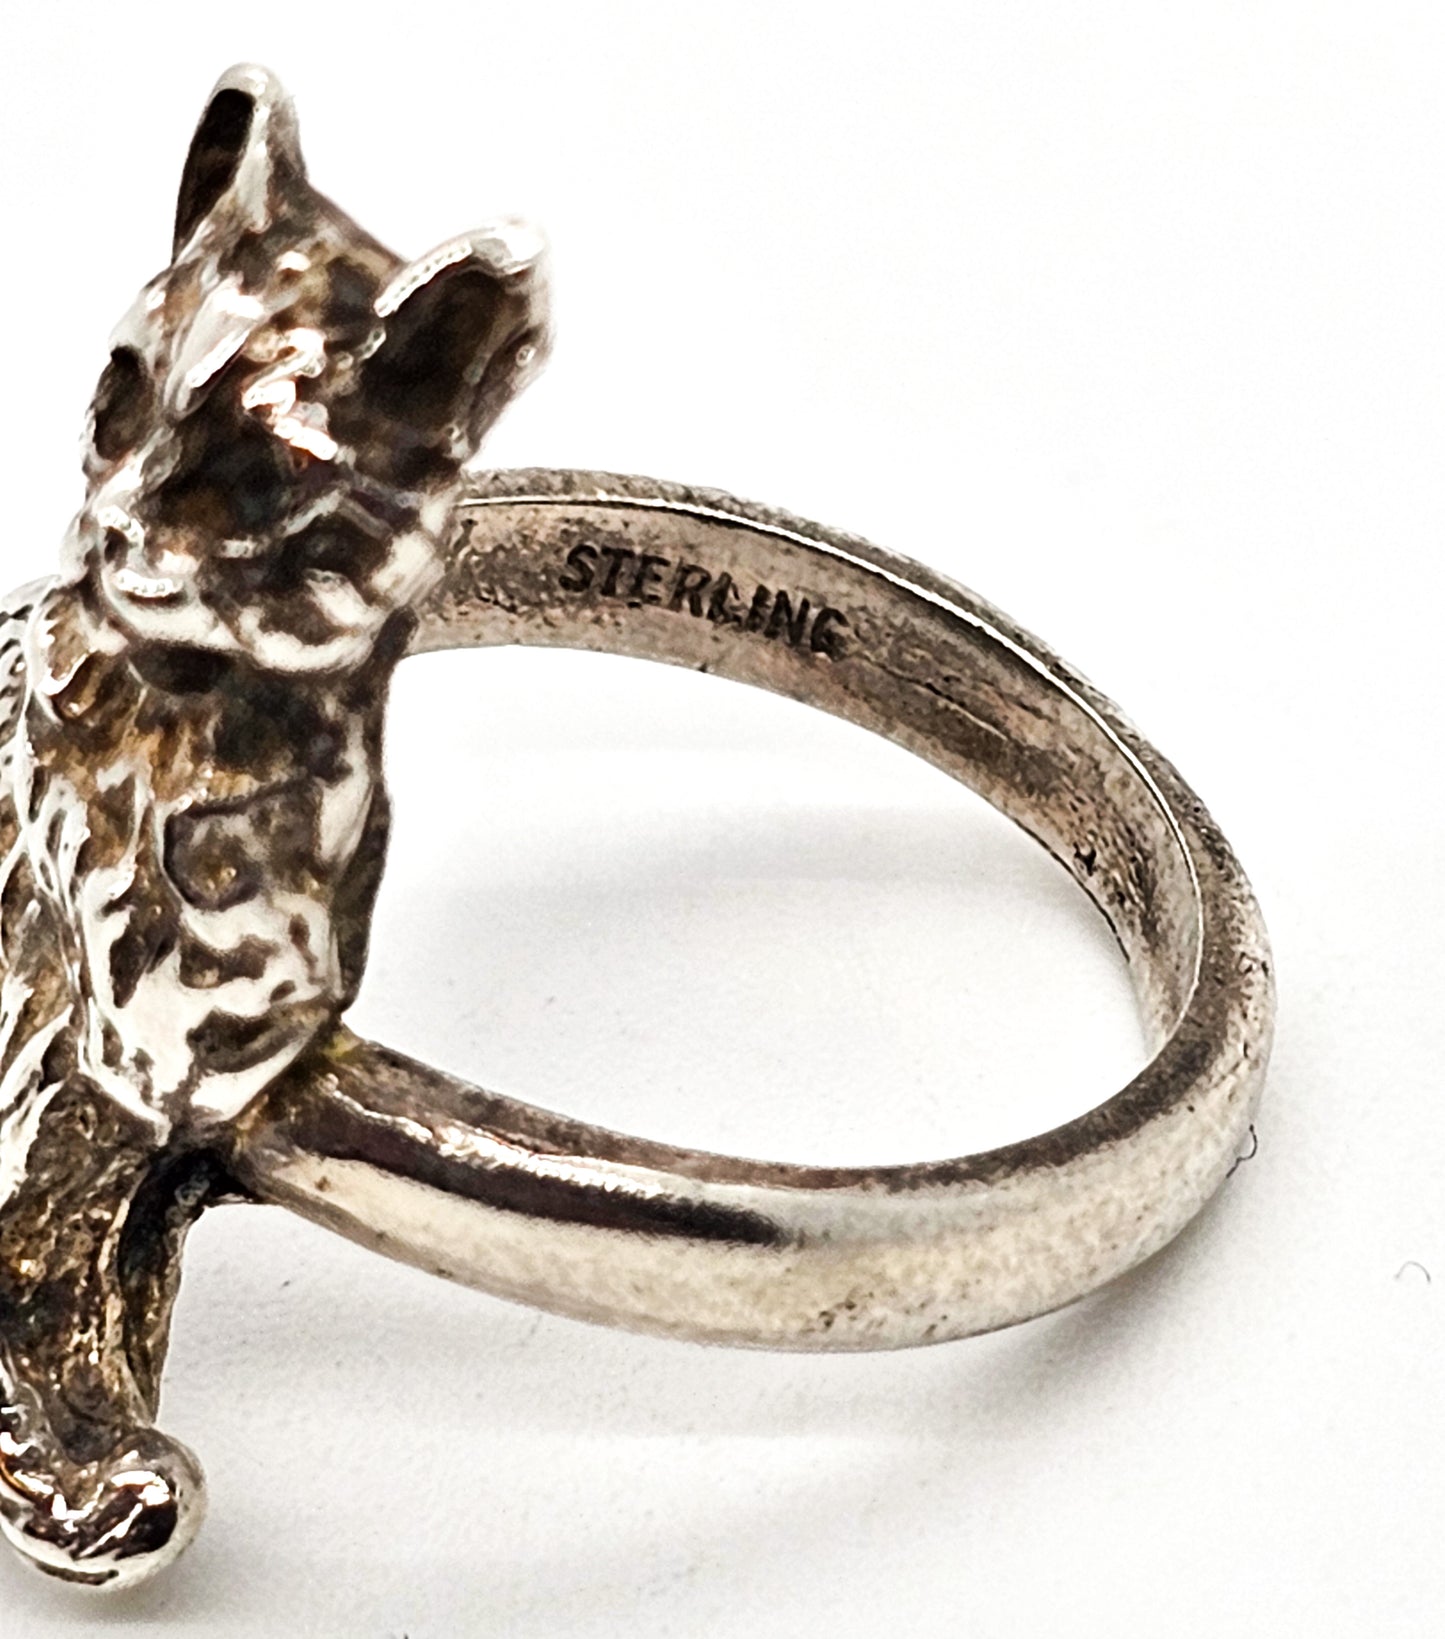 Sitting Pretty Kitty Cat feline figural solid sterling silver vintage ring size 7